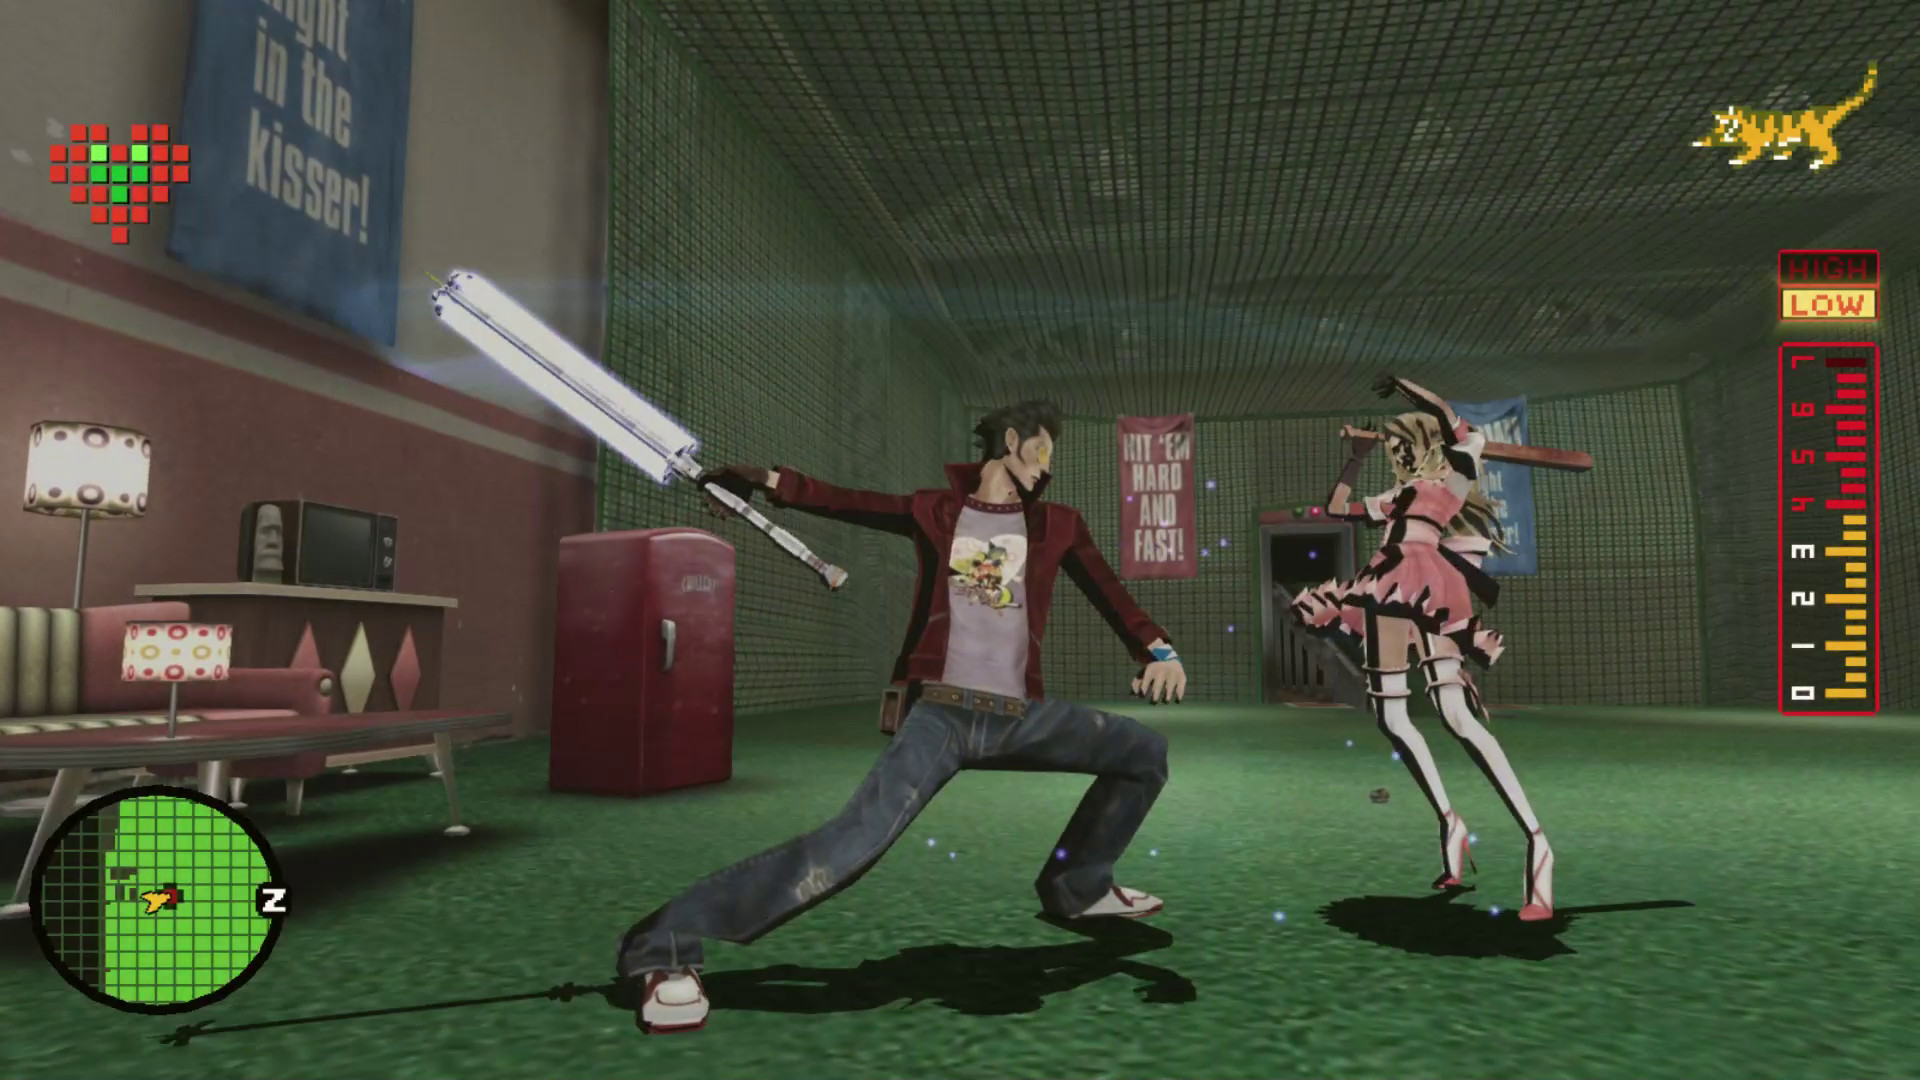 Save 50% on No More Heroes on Steam